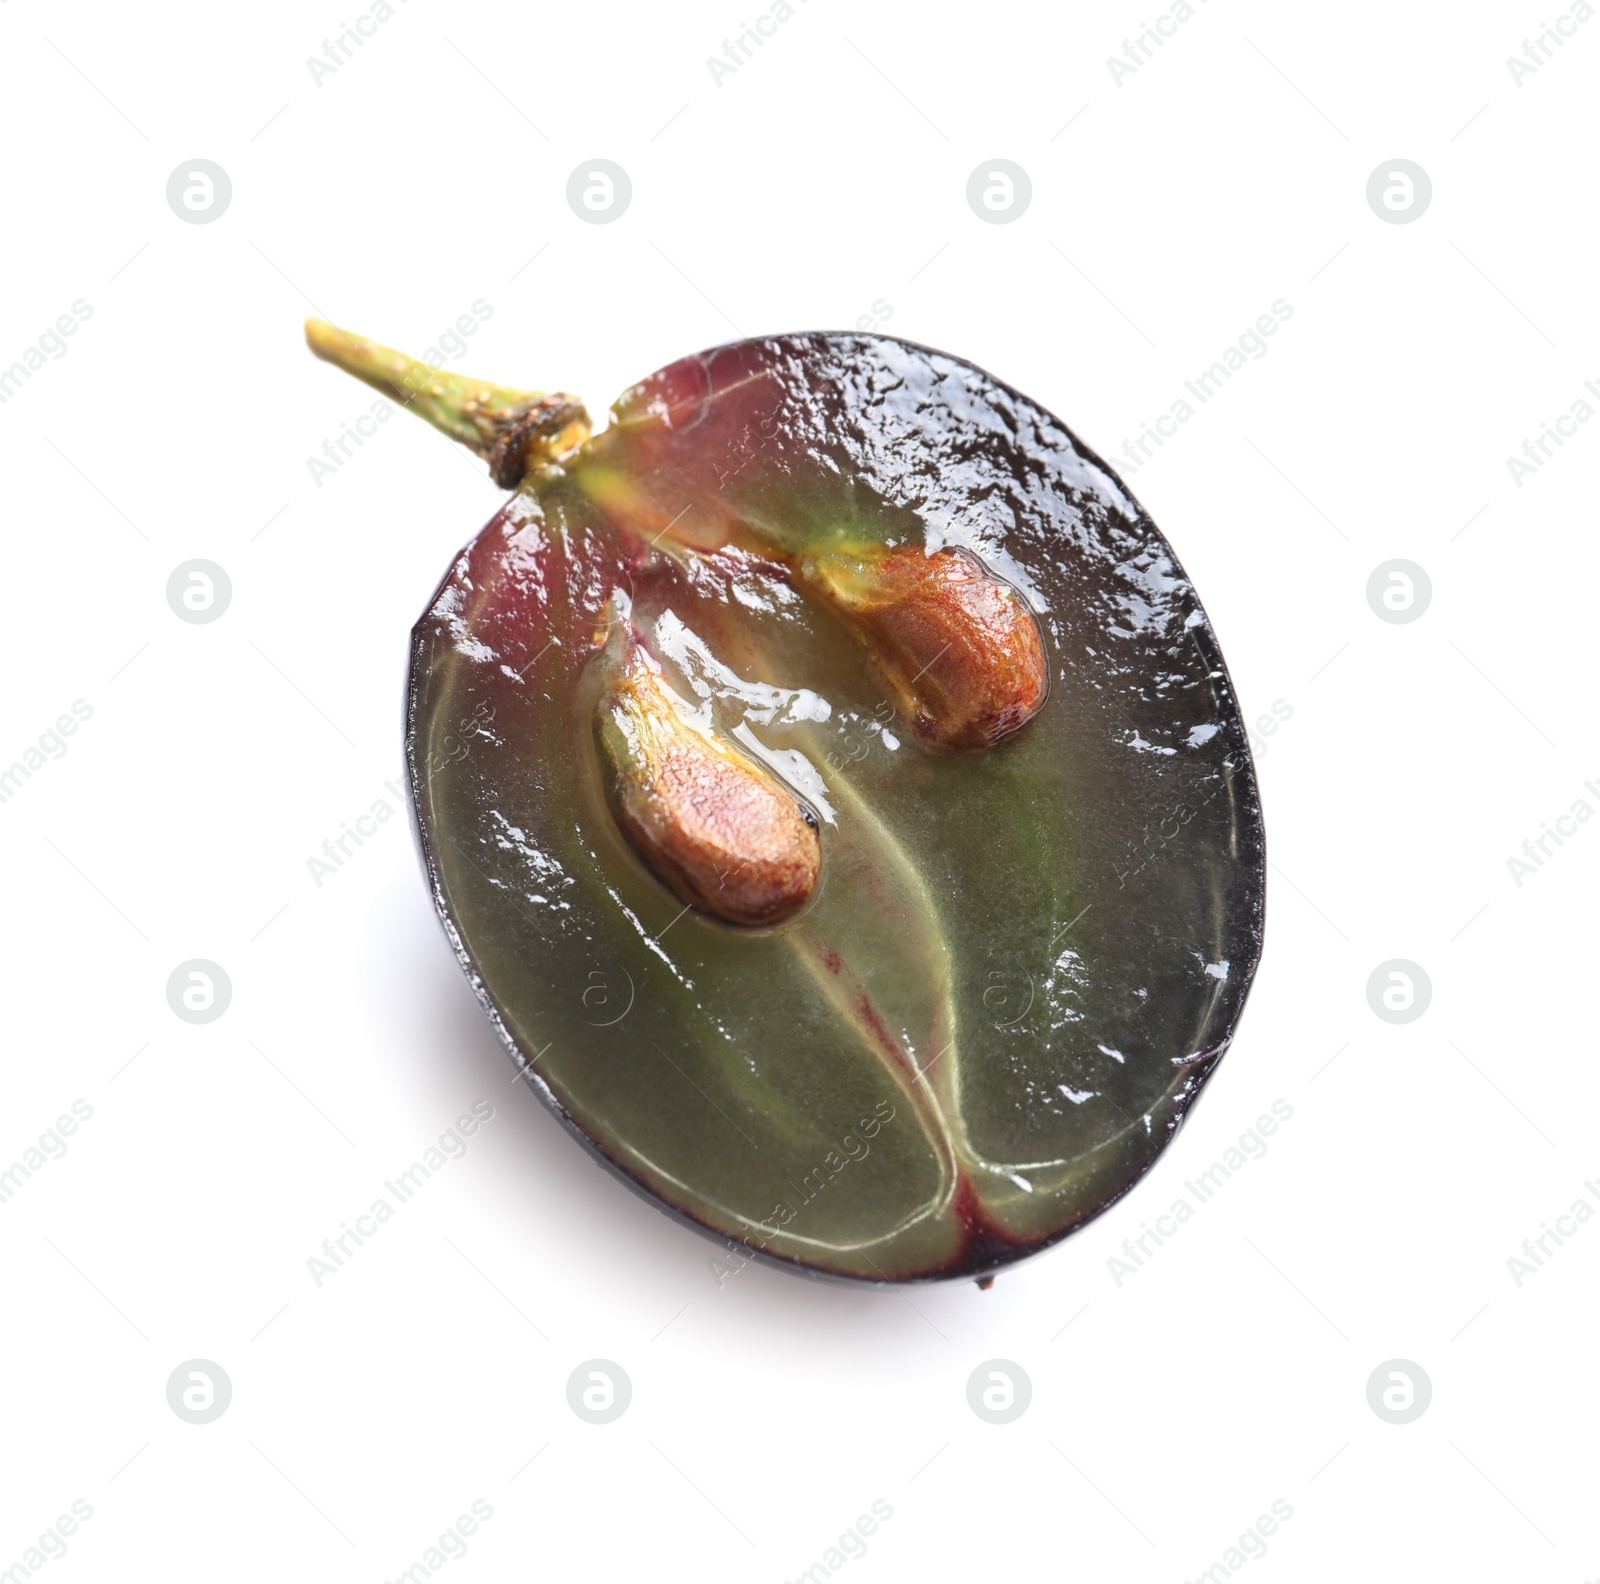 Photo of Cut fresh ripe juicy grape with seeds on white background